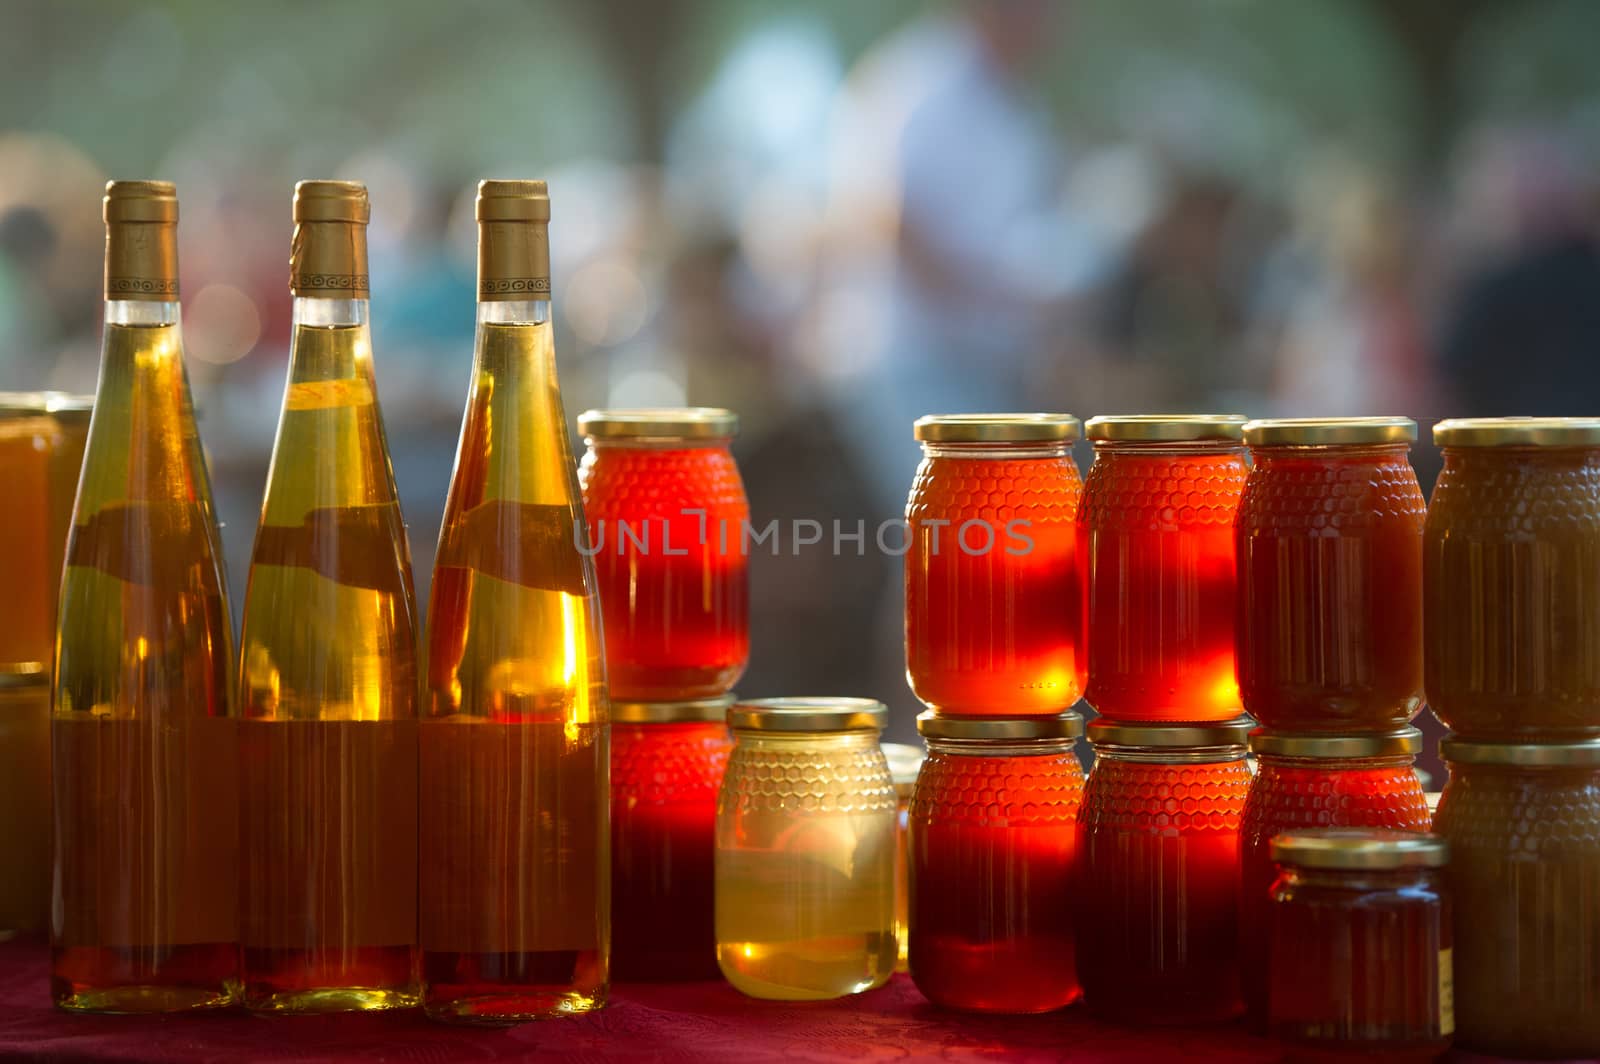 Honey and wine on a market stall by FreeProd